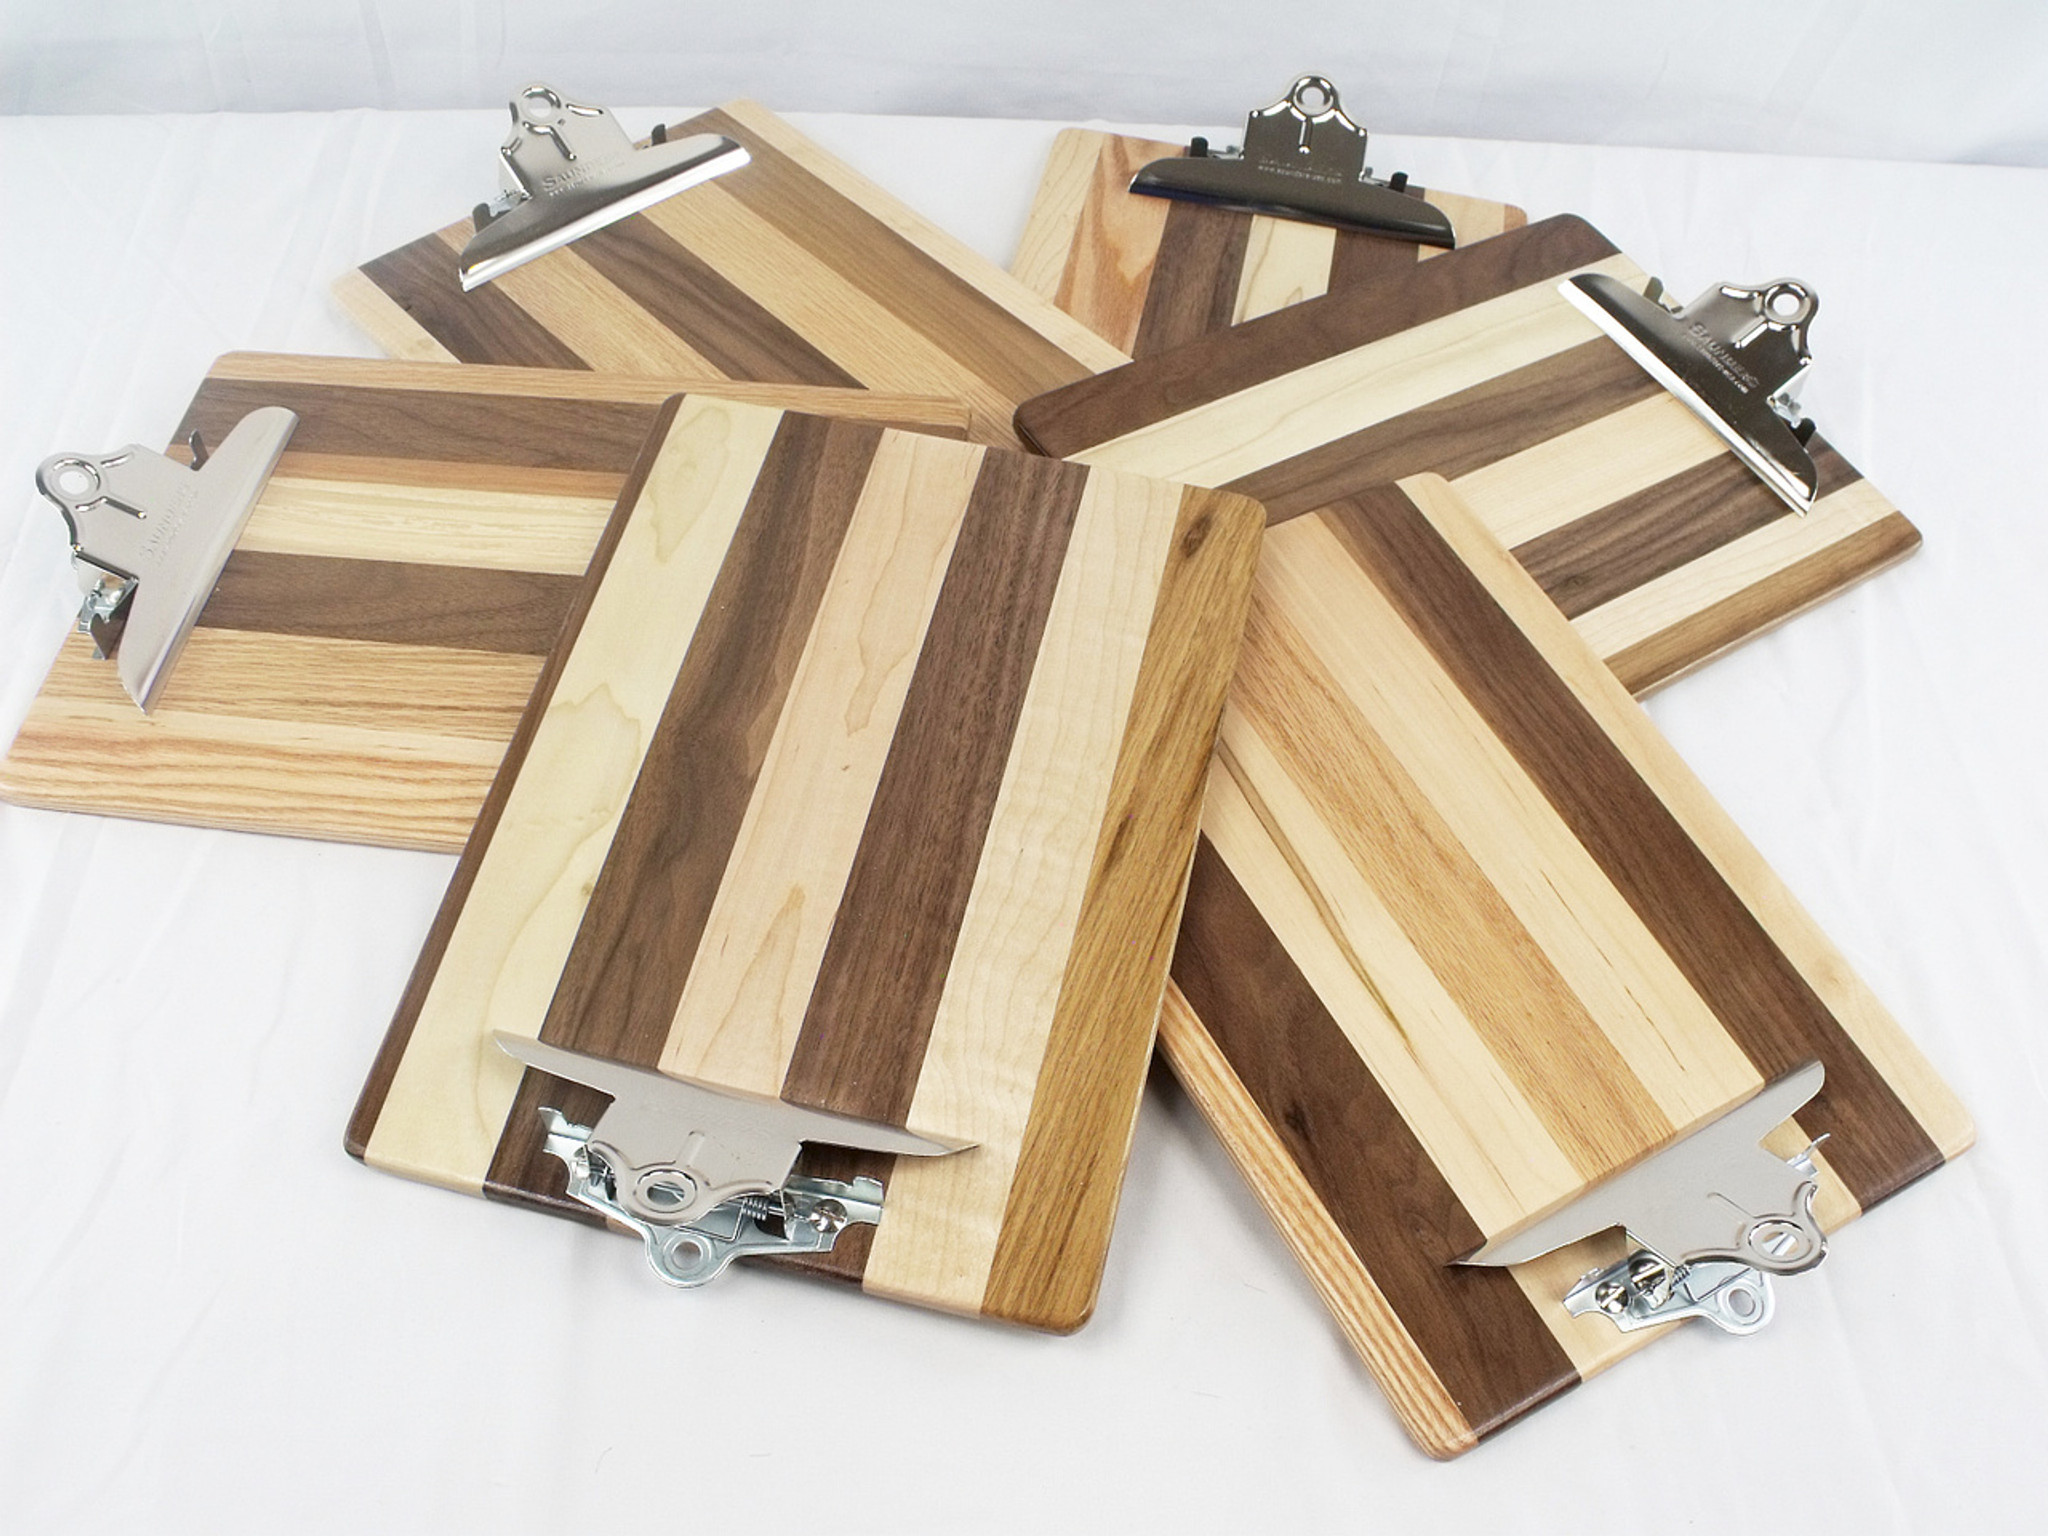 Wooden Full Size Clipboard - repurposed and salvaged wood - R designs